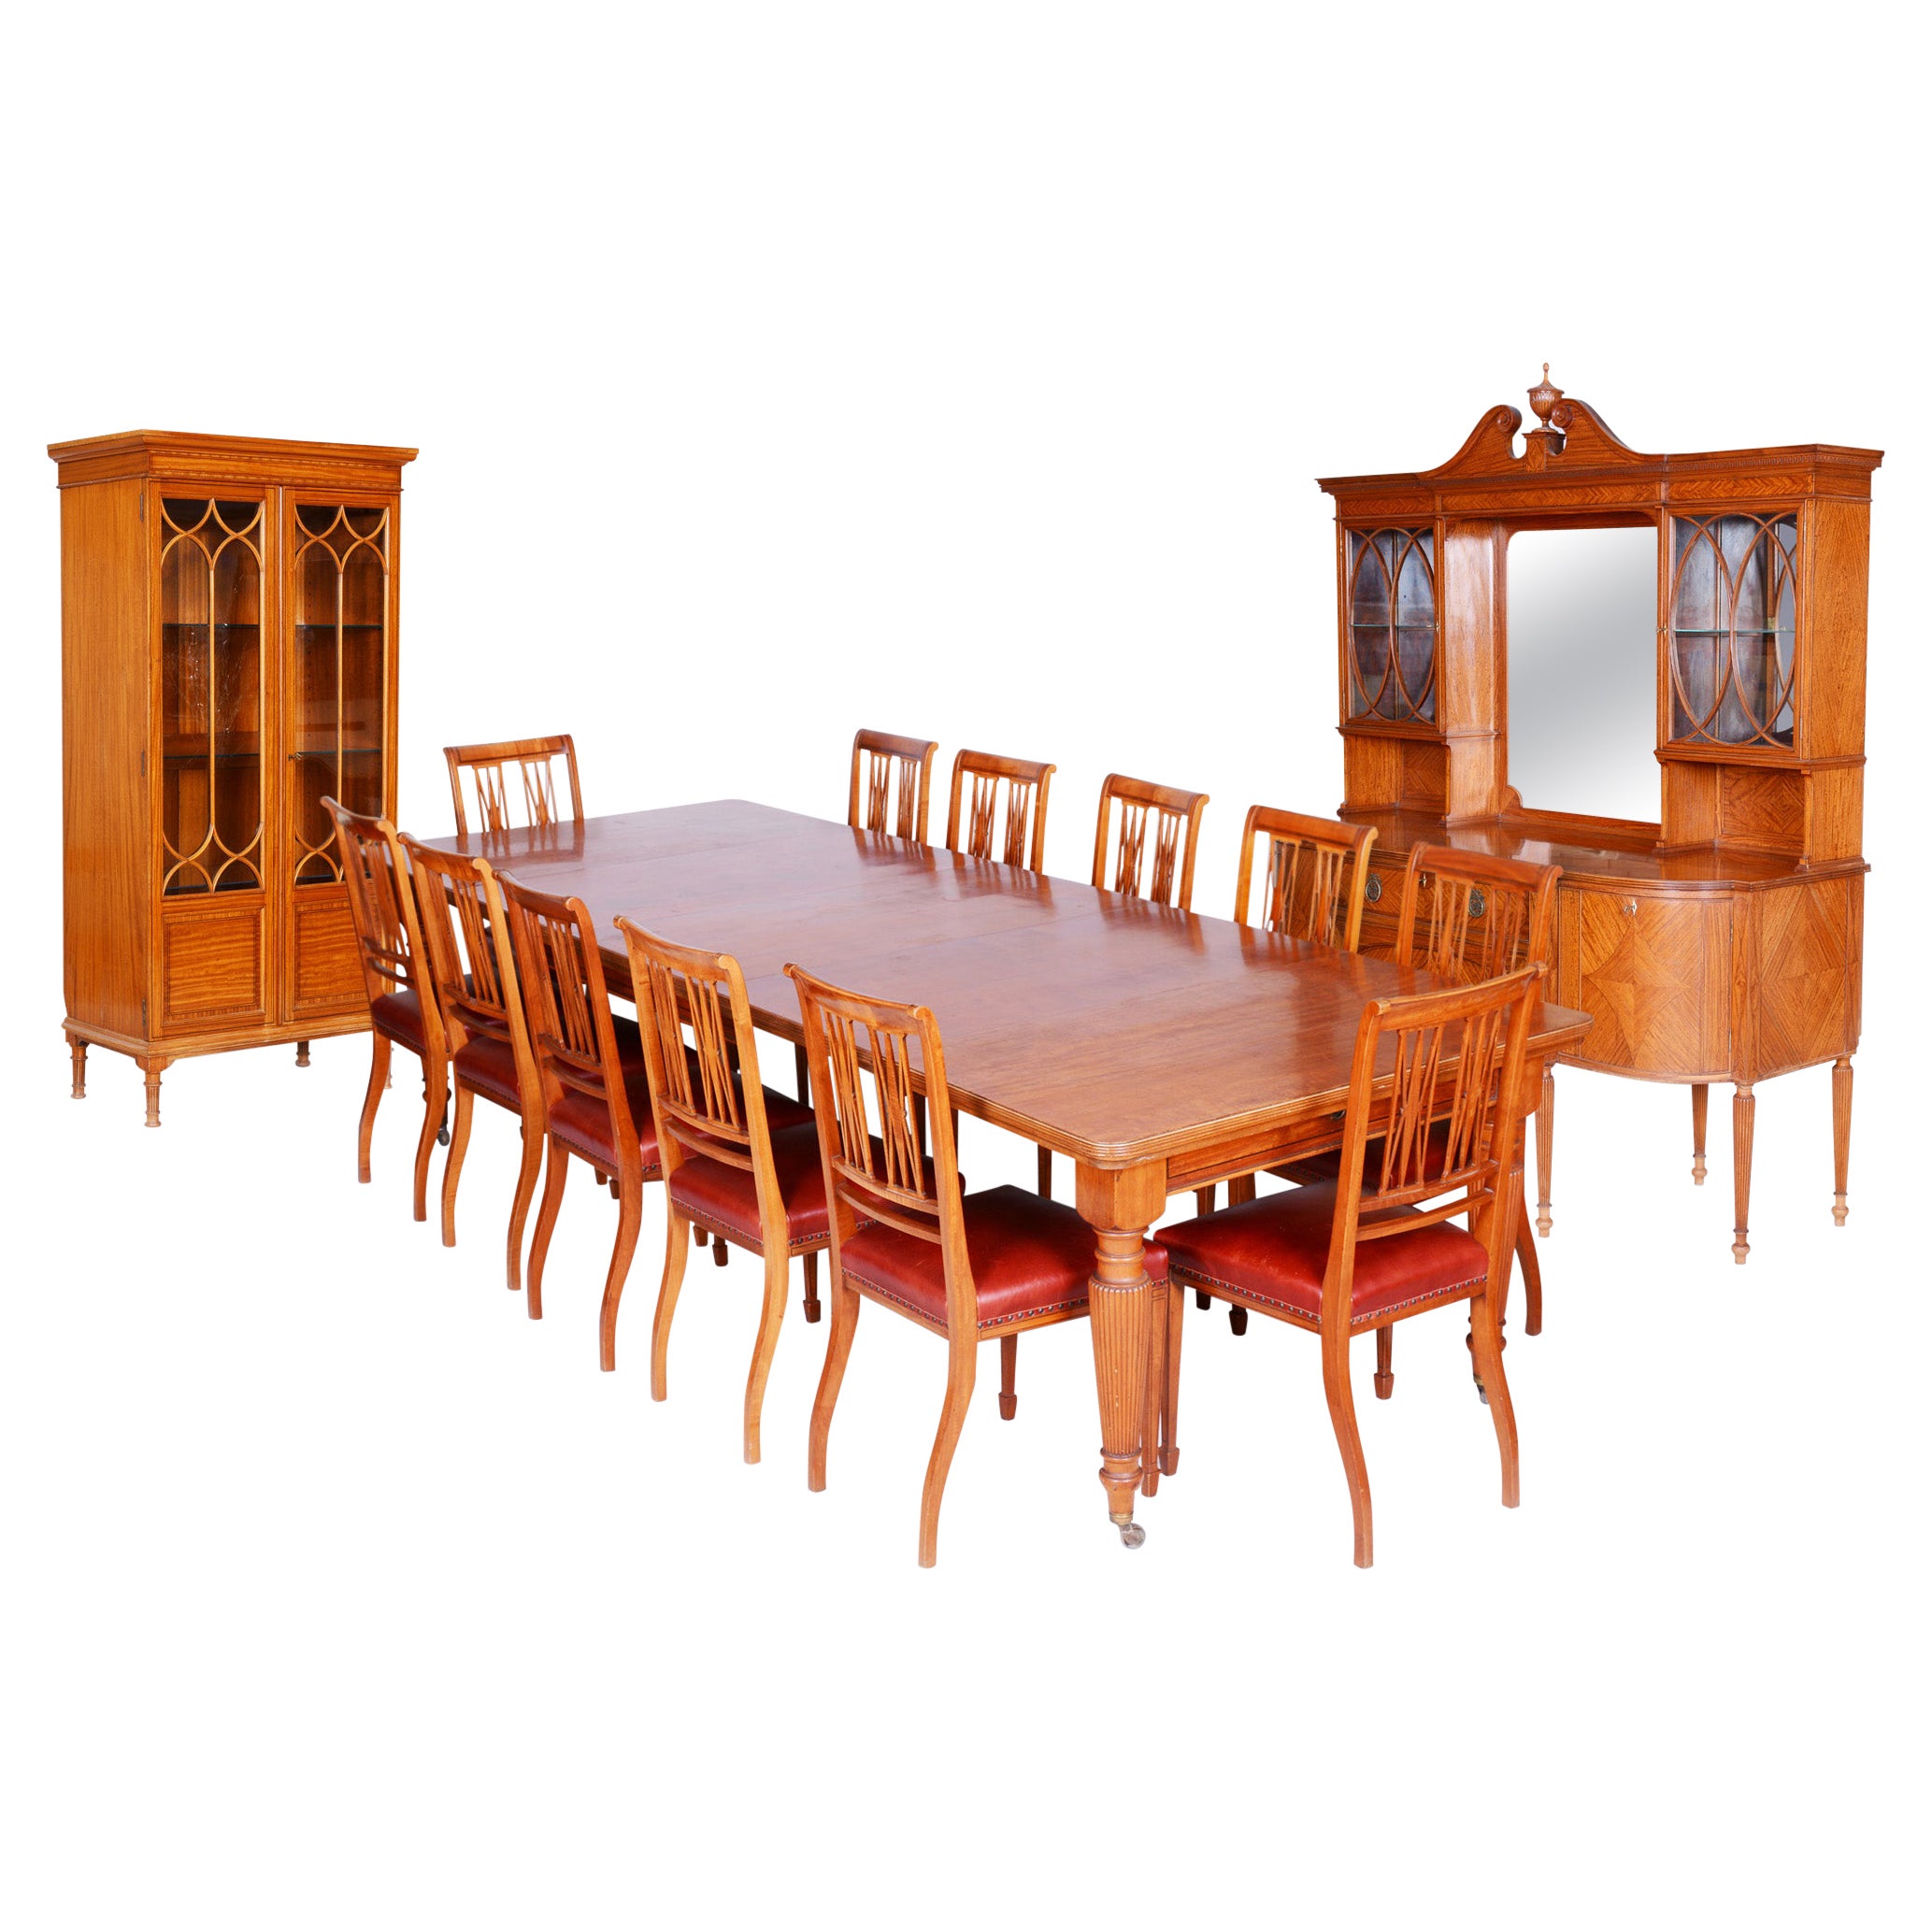 19th Century Original British Dinning Room Set with 12 Chairs, Satin Wood For Sale